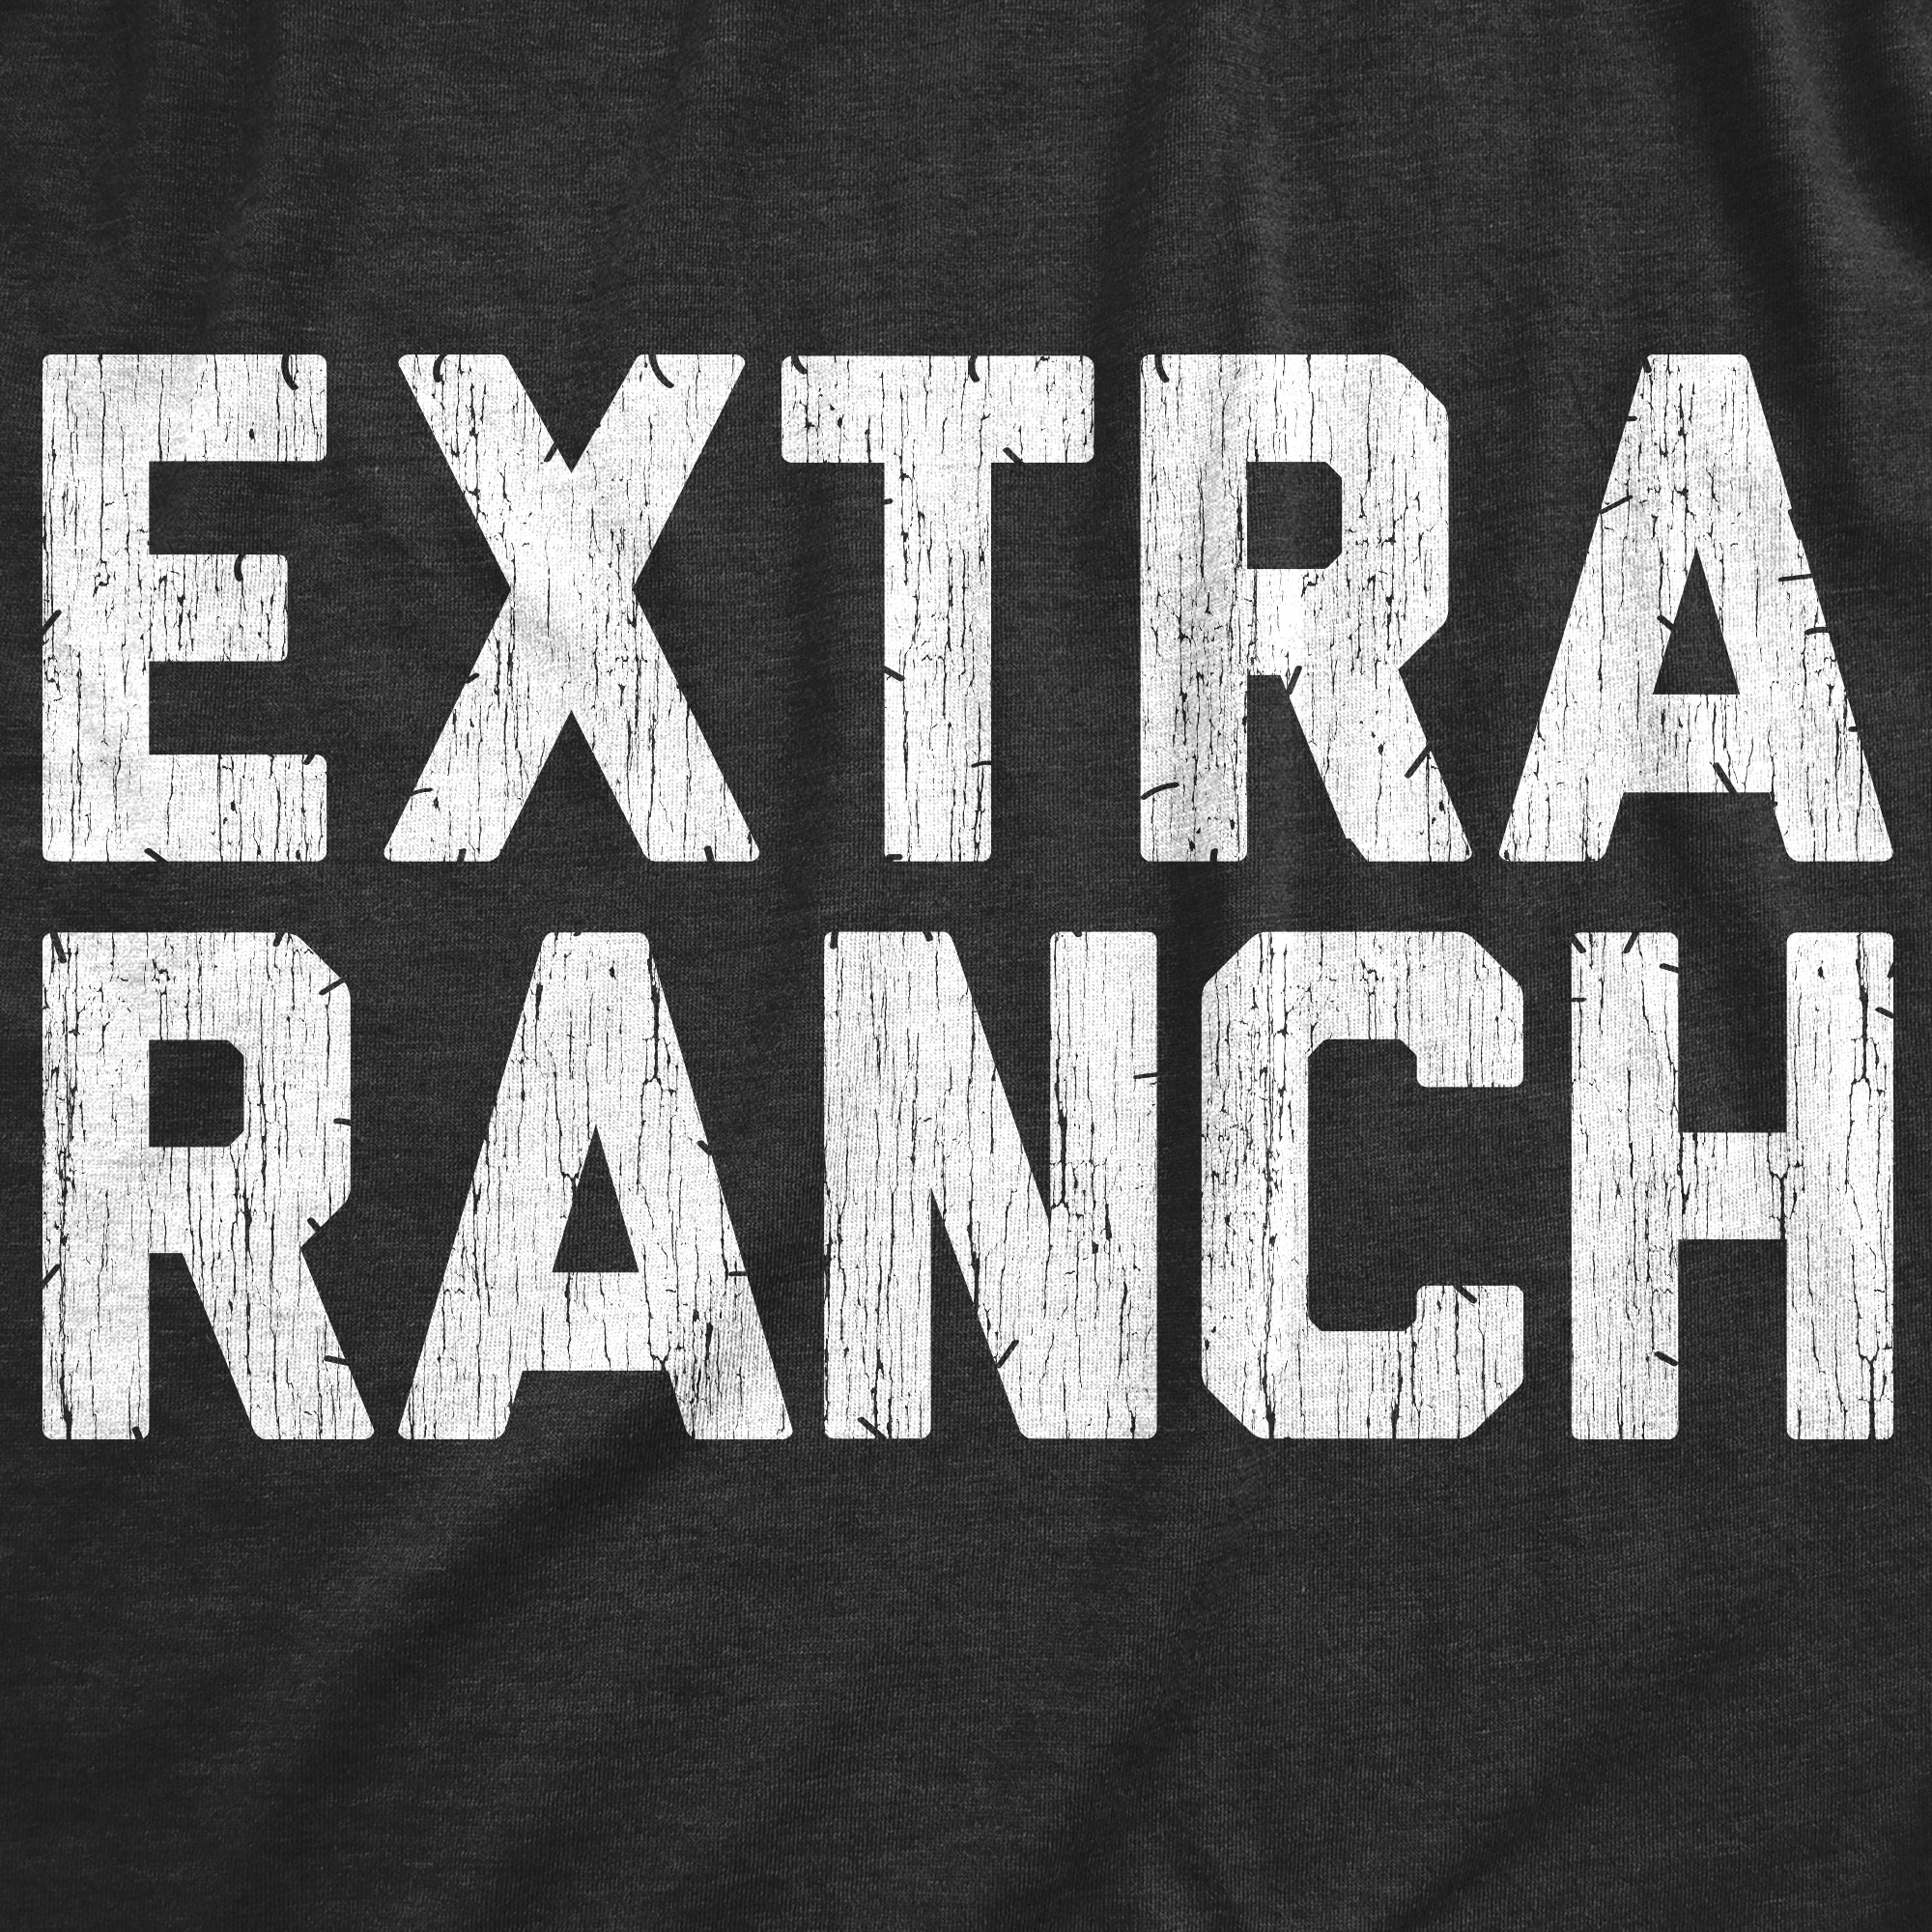 Funny Heather Black - RANCH Extra Ranch Womens T Shirt Nerdy Food Tee